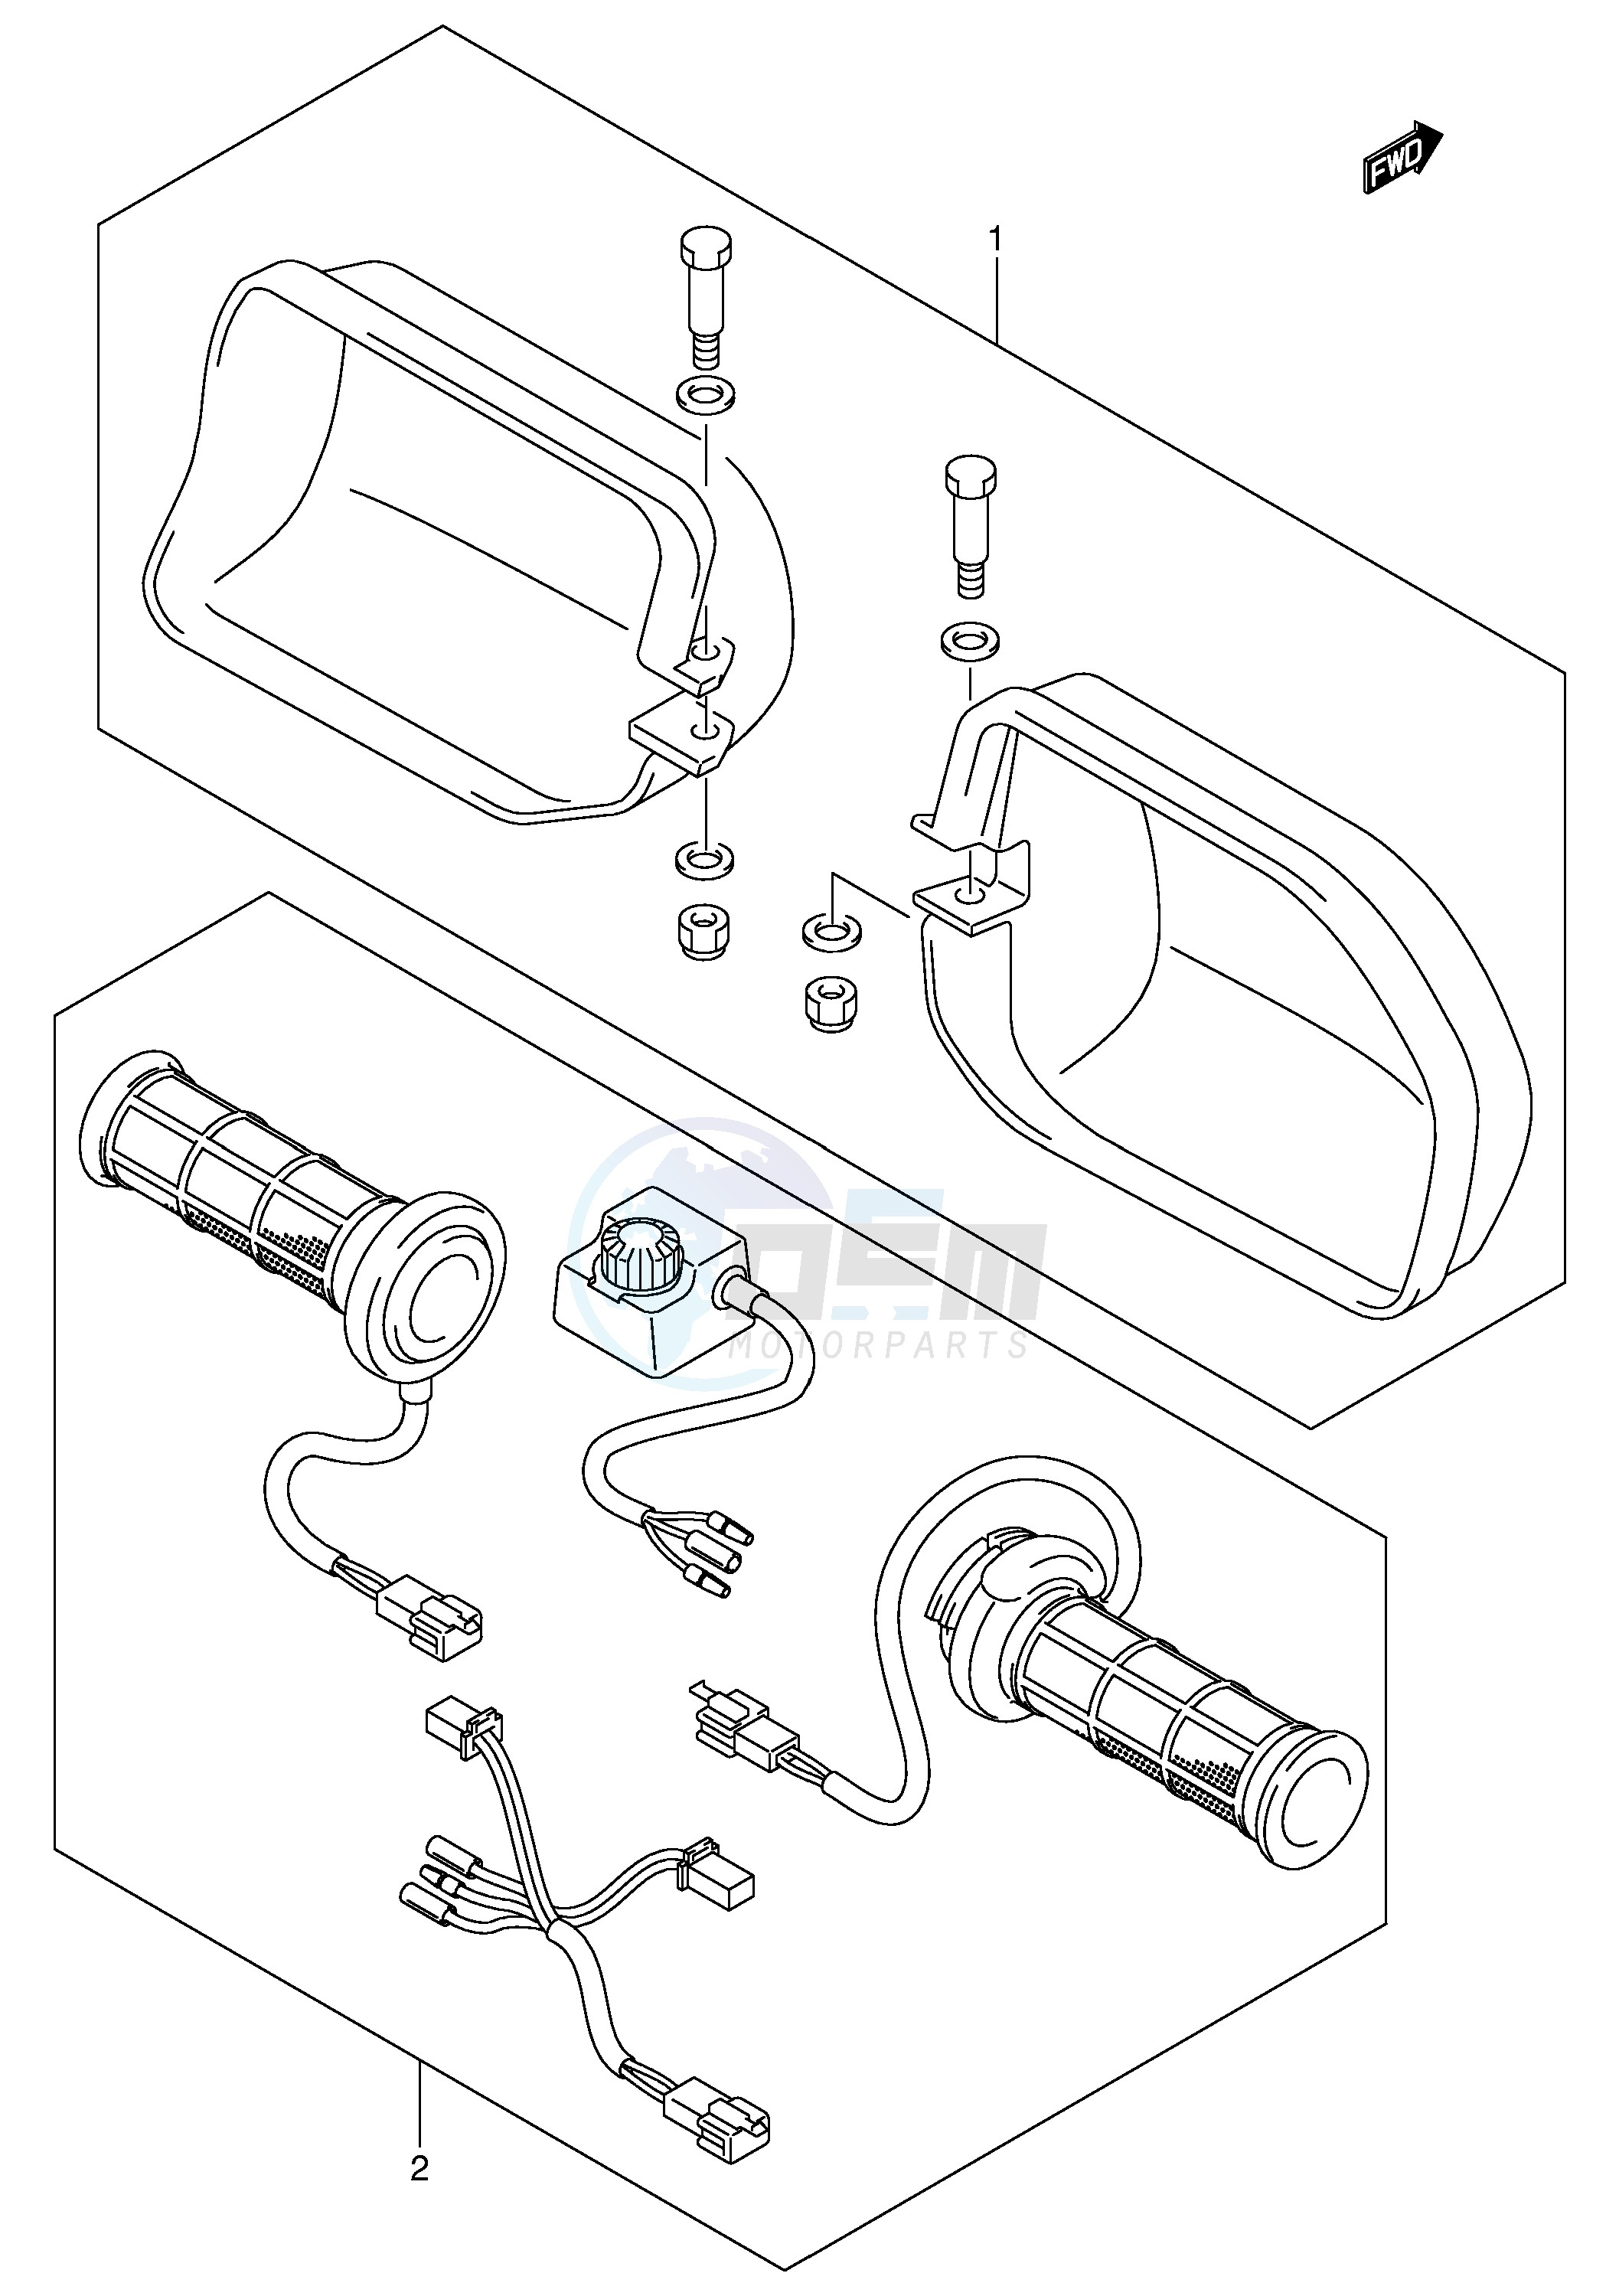 KNUCKLE COVER (MODEL Y OPT) blueprint